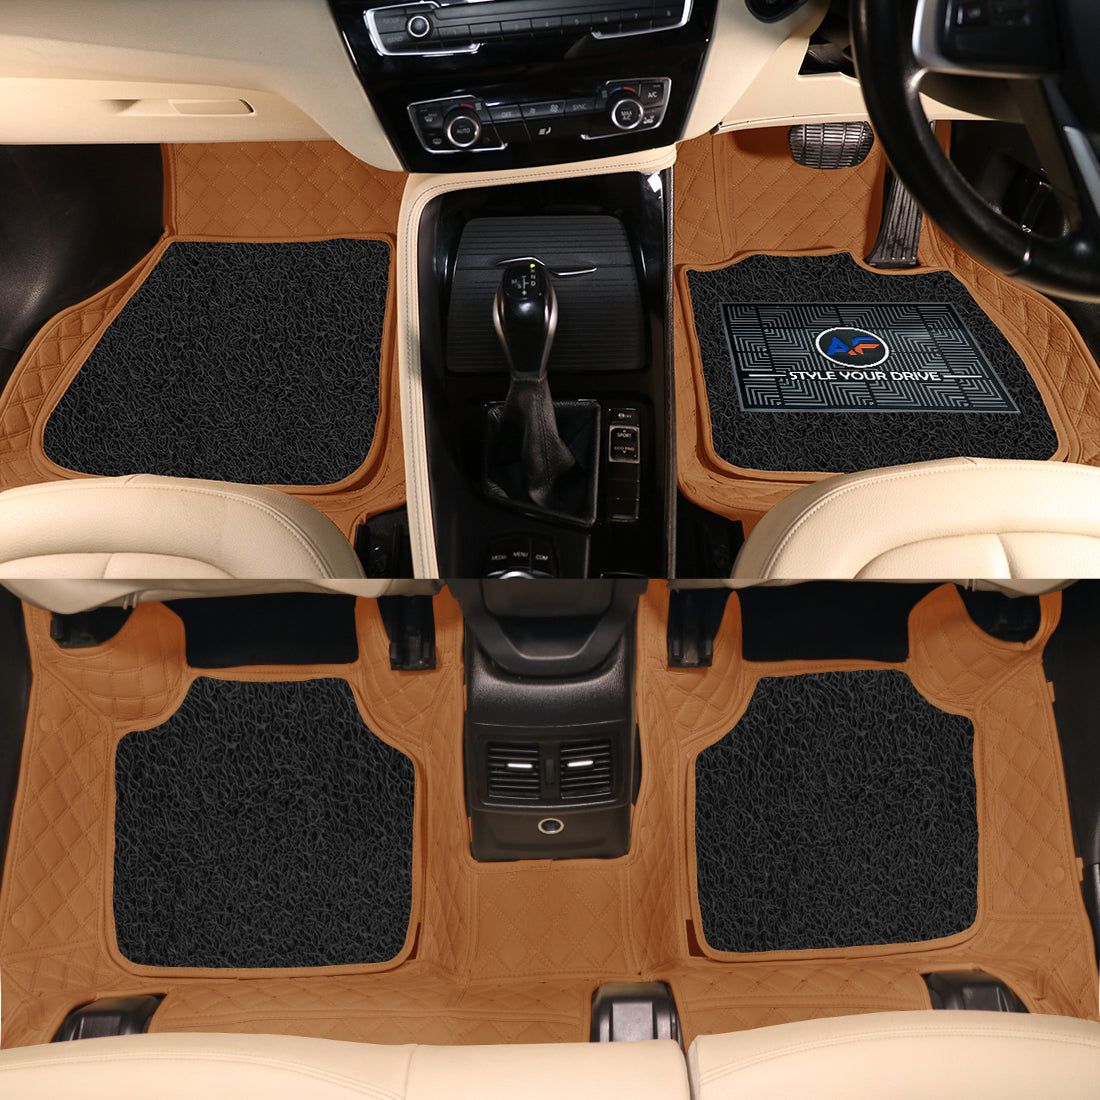 Ford Freestyle 2018 7D Luxury Car Mat, All Weather Proof, Anti-Skid, 100% Waterproof & Odorless with Unique Diamond Fish Design (24mm Luxury PU Leather, 2 Rows)